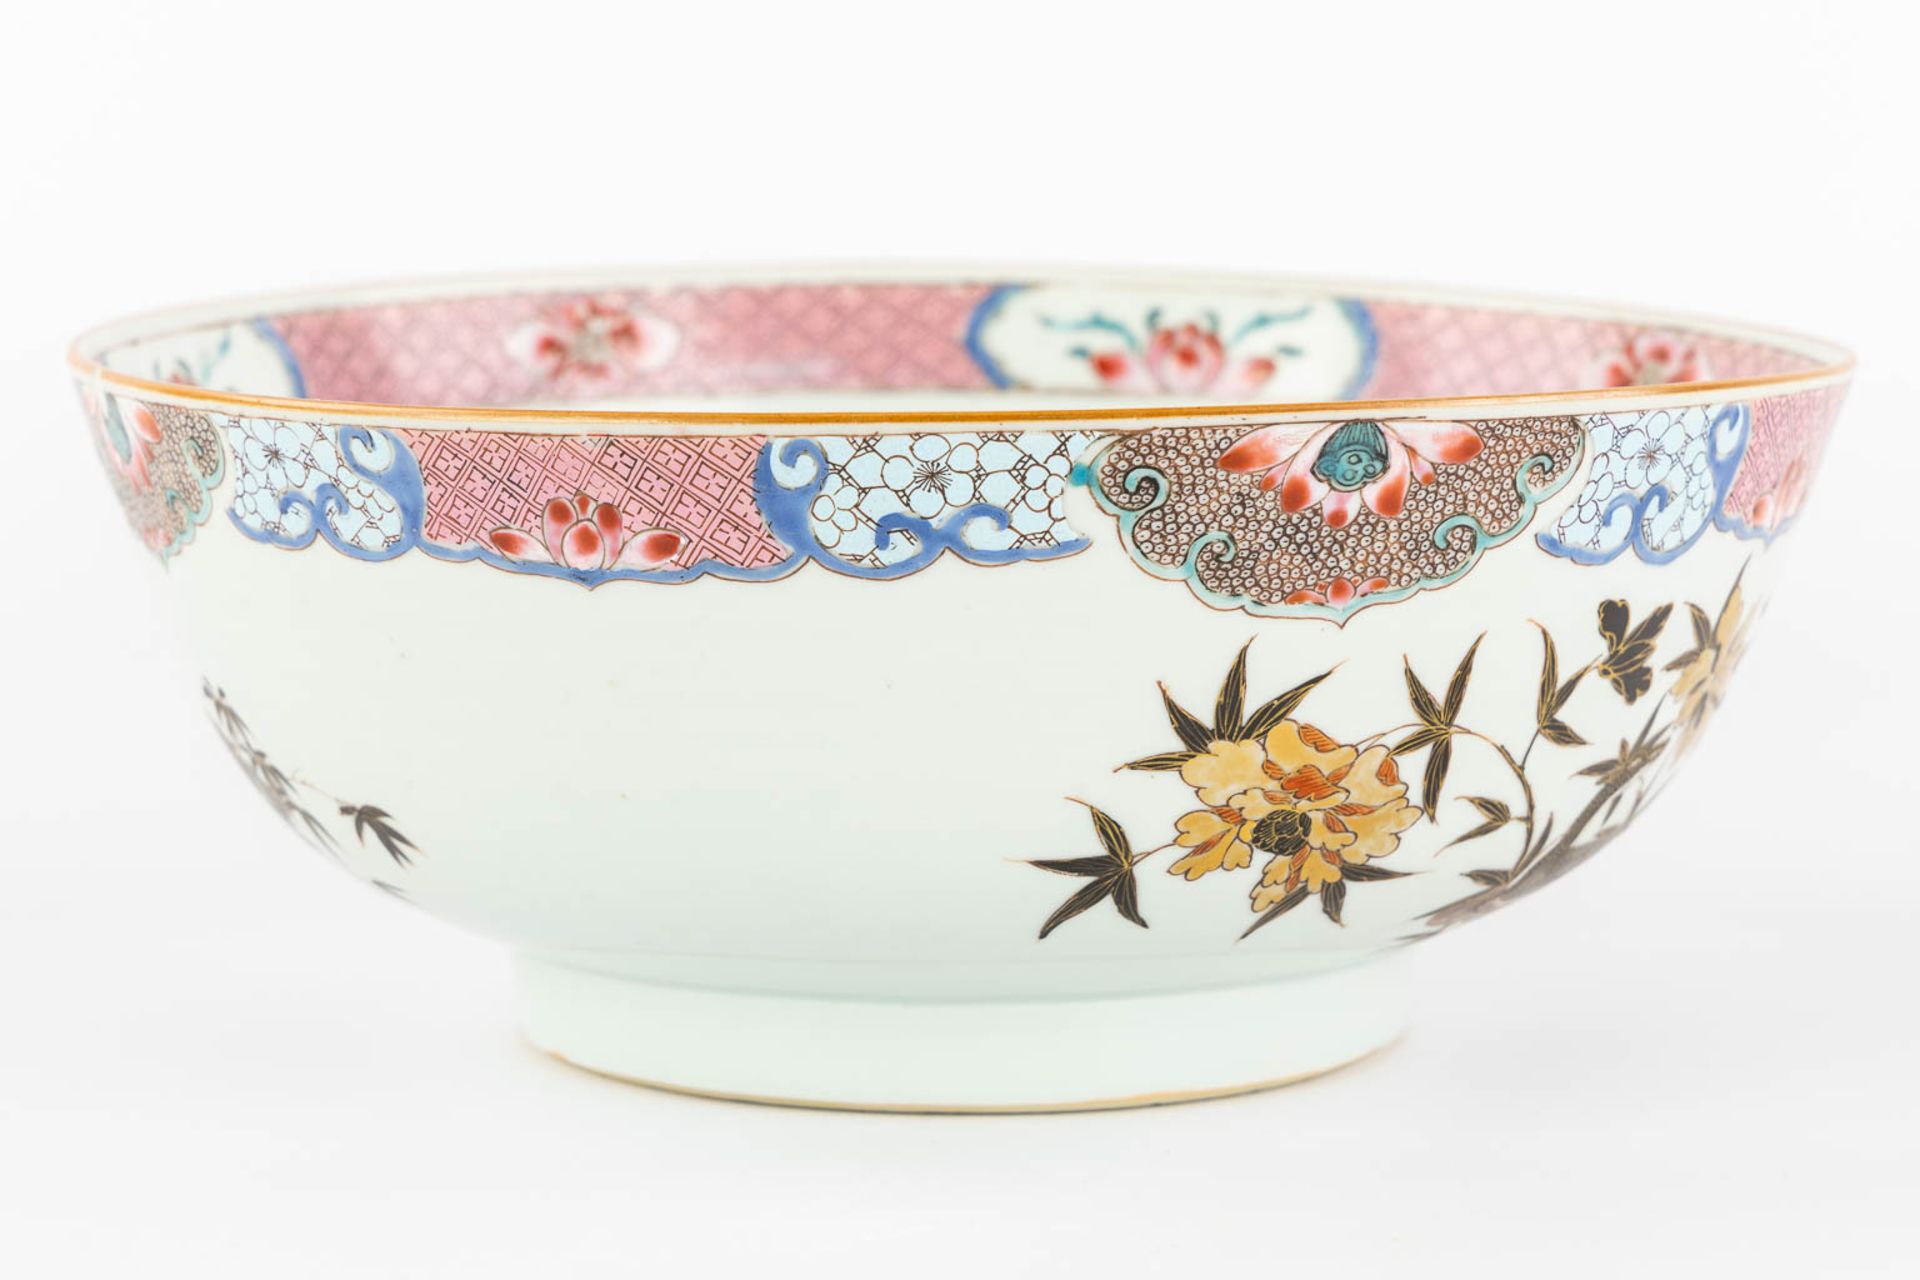 A large Chinese Famille Rose 'Deer' bowl. 19th C. (H:11 x D:28,5 cm) - Image 7 of 14